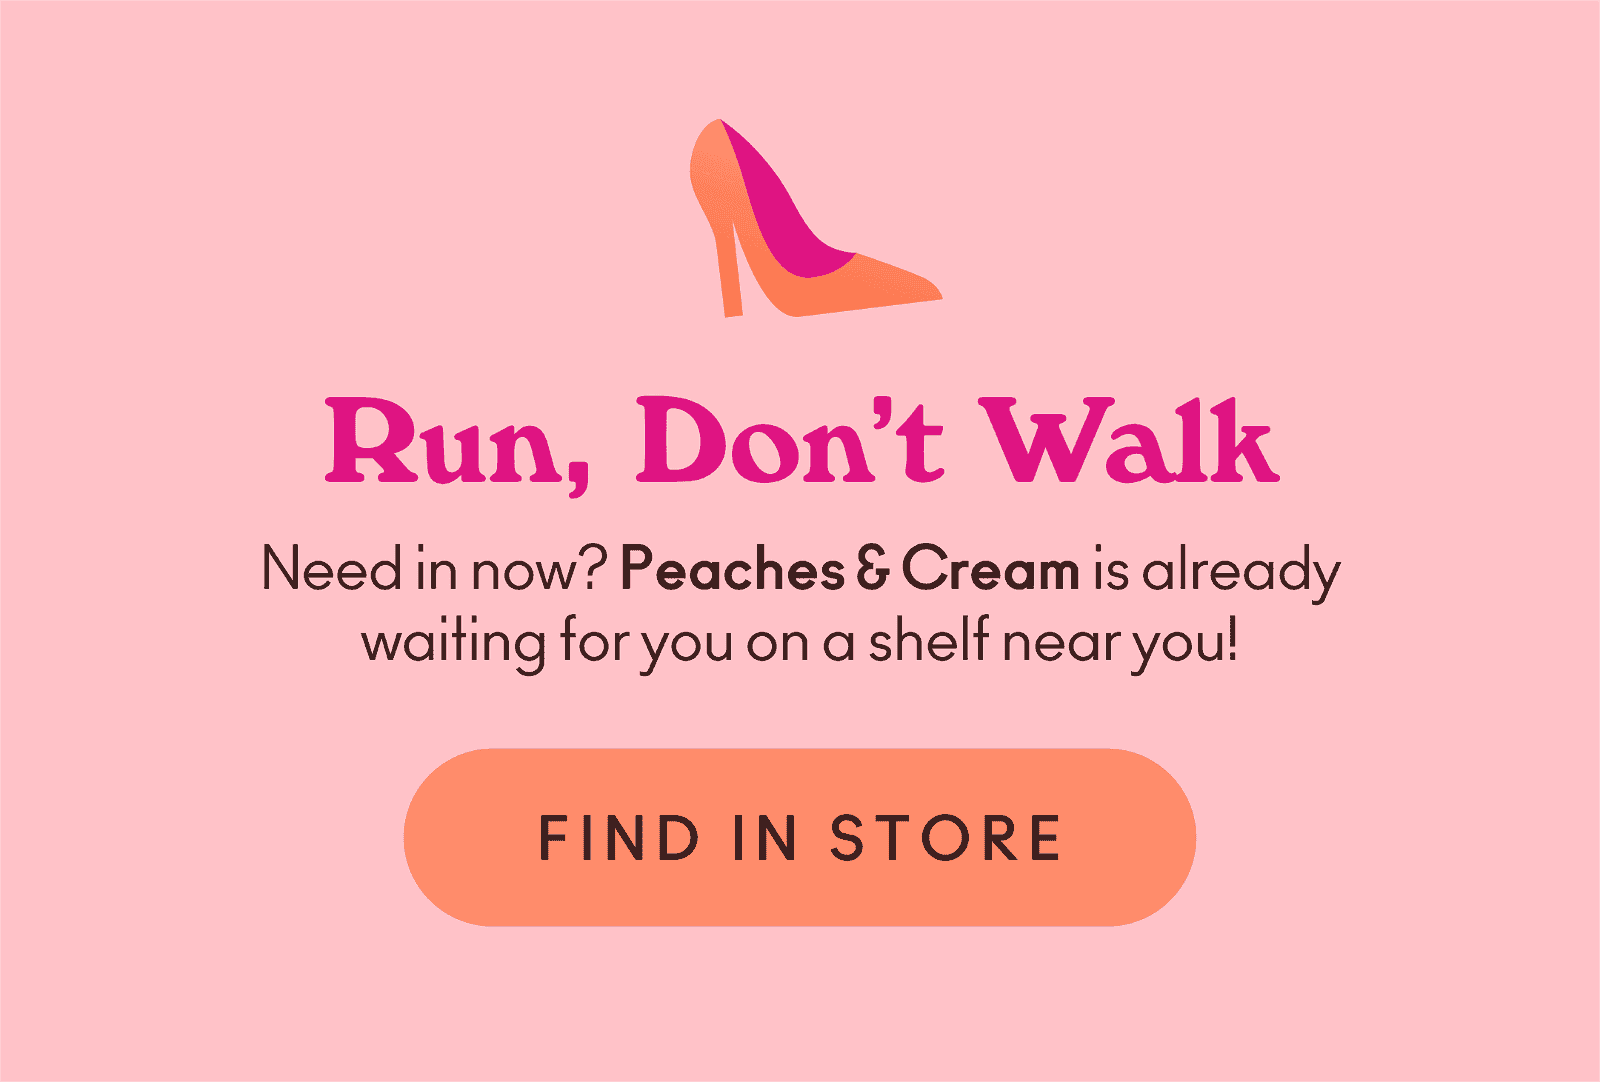 Need in now? Peaches & Cream is already waiting for you on a shelf near you!